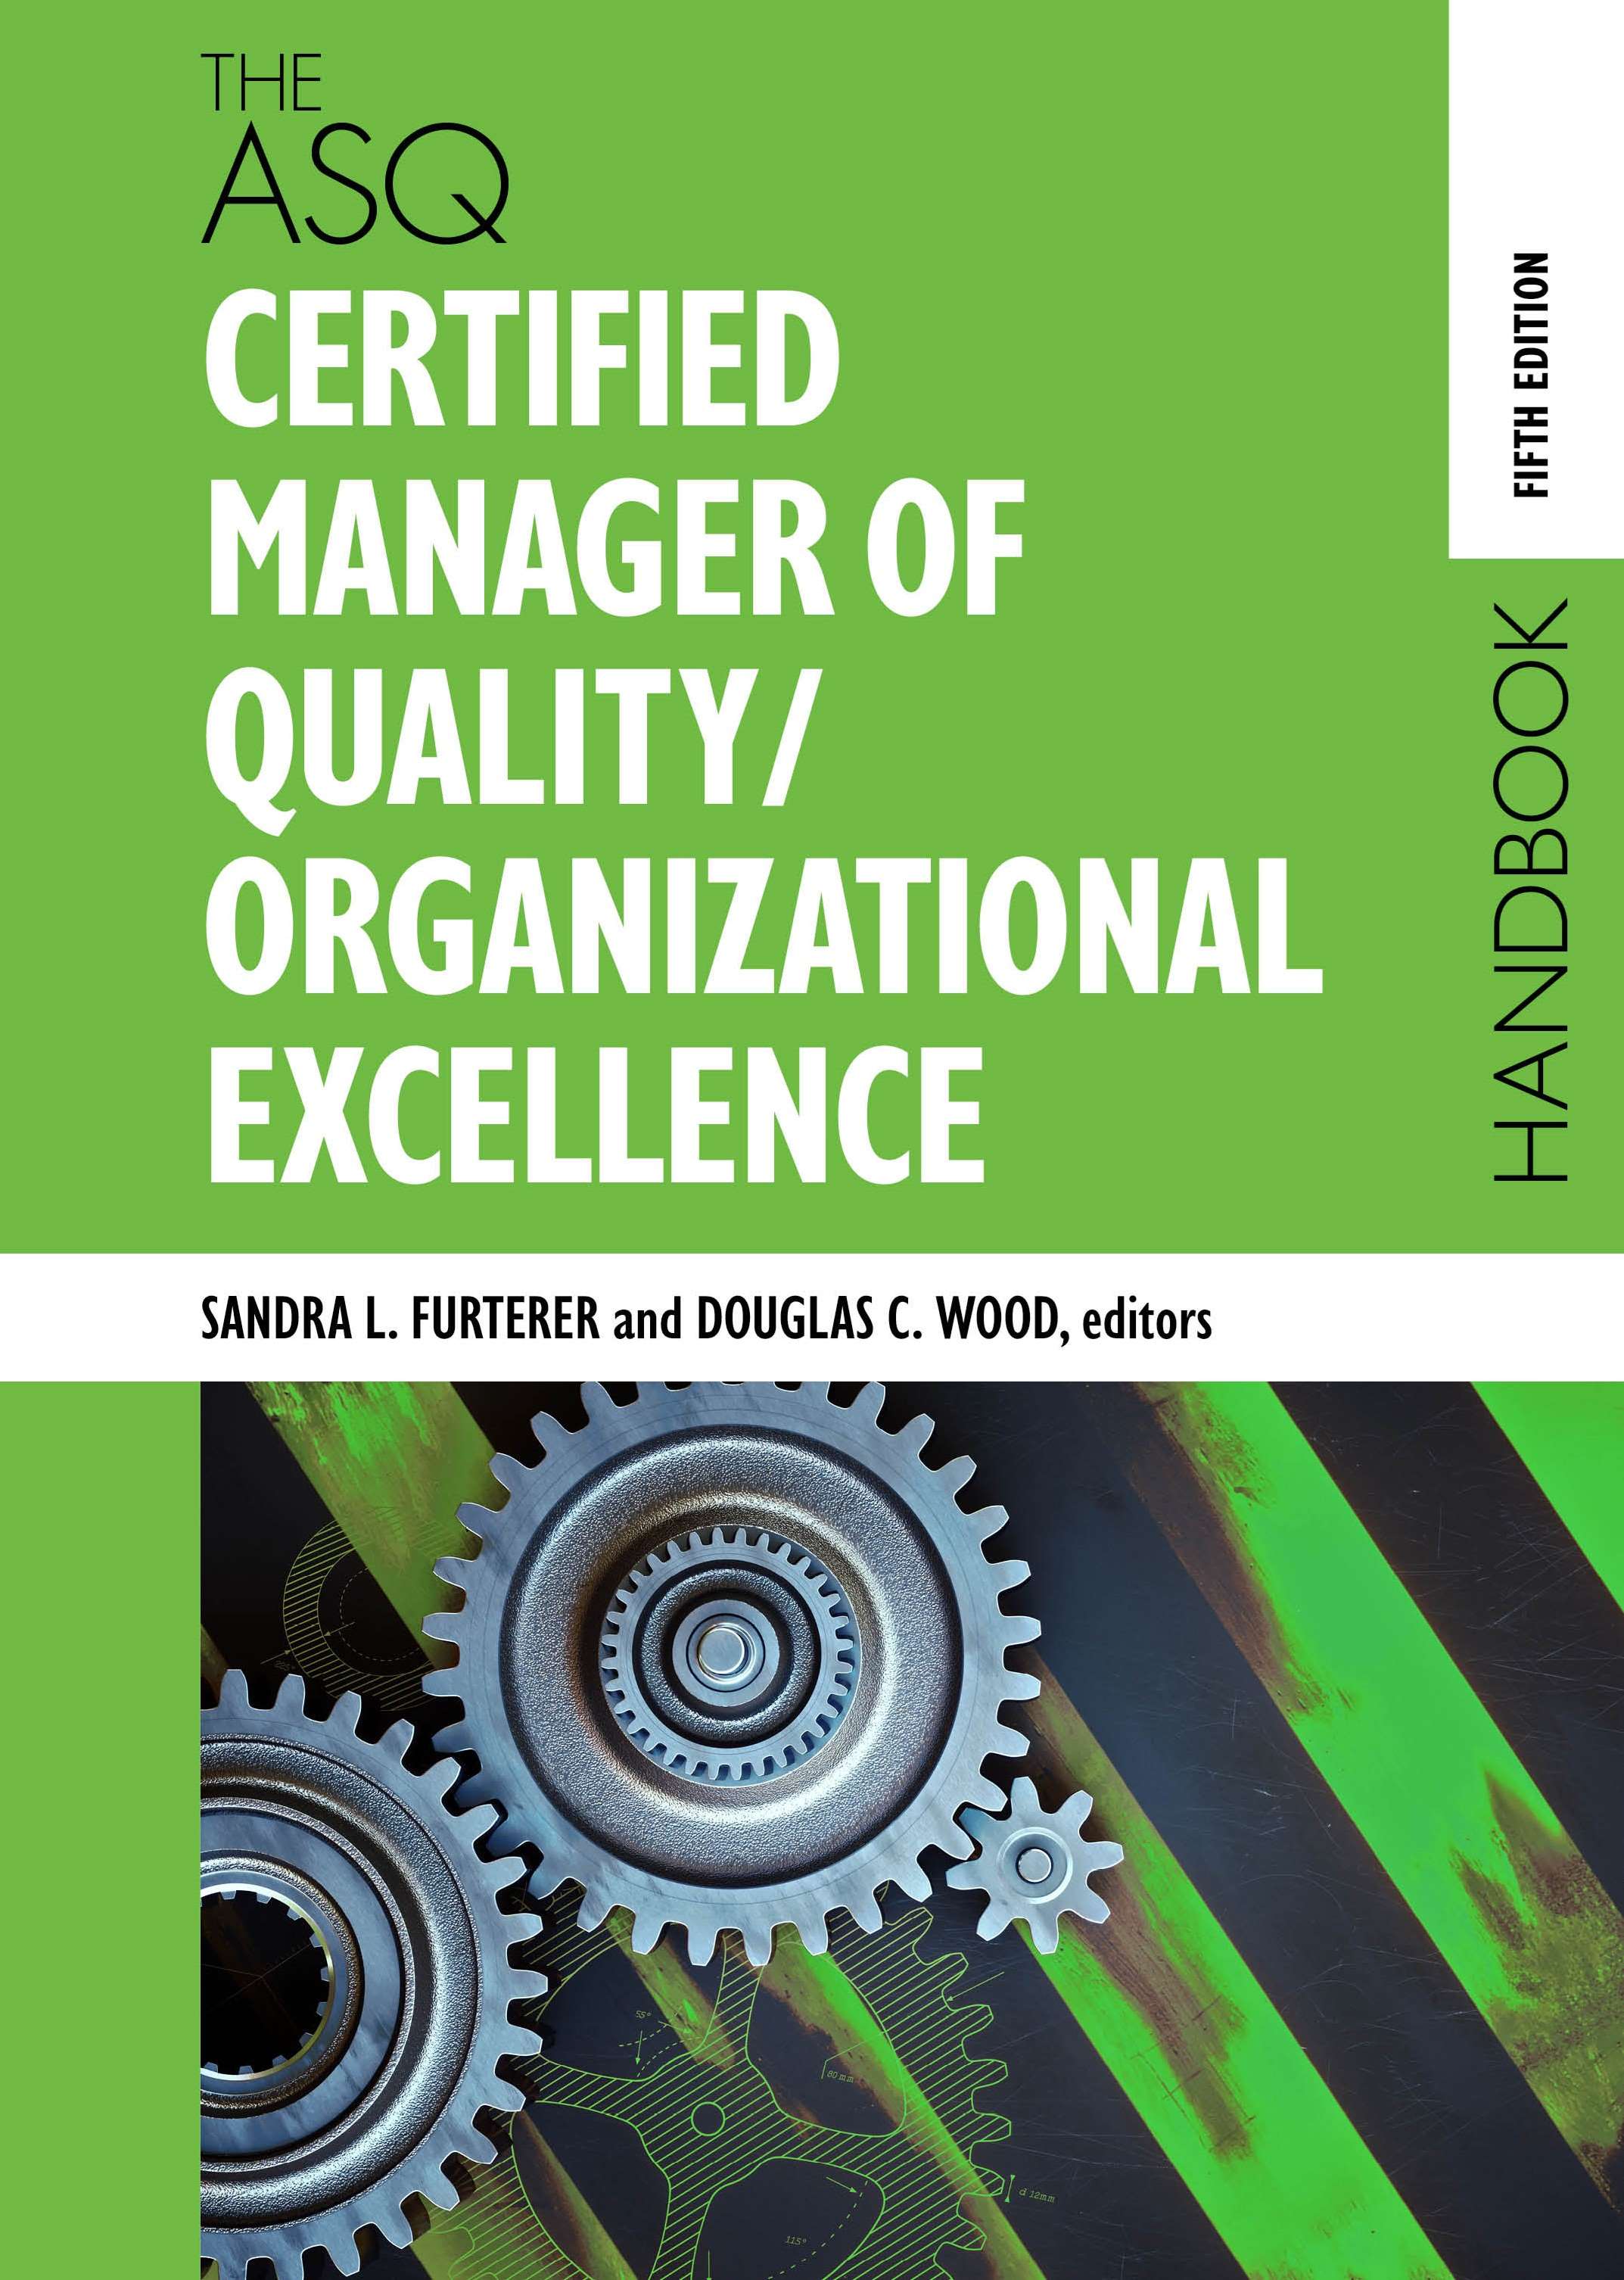 ASQ Certified Manager of Quality/Organizational Excellence Handbook, Fifth Edition